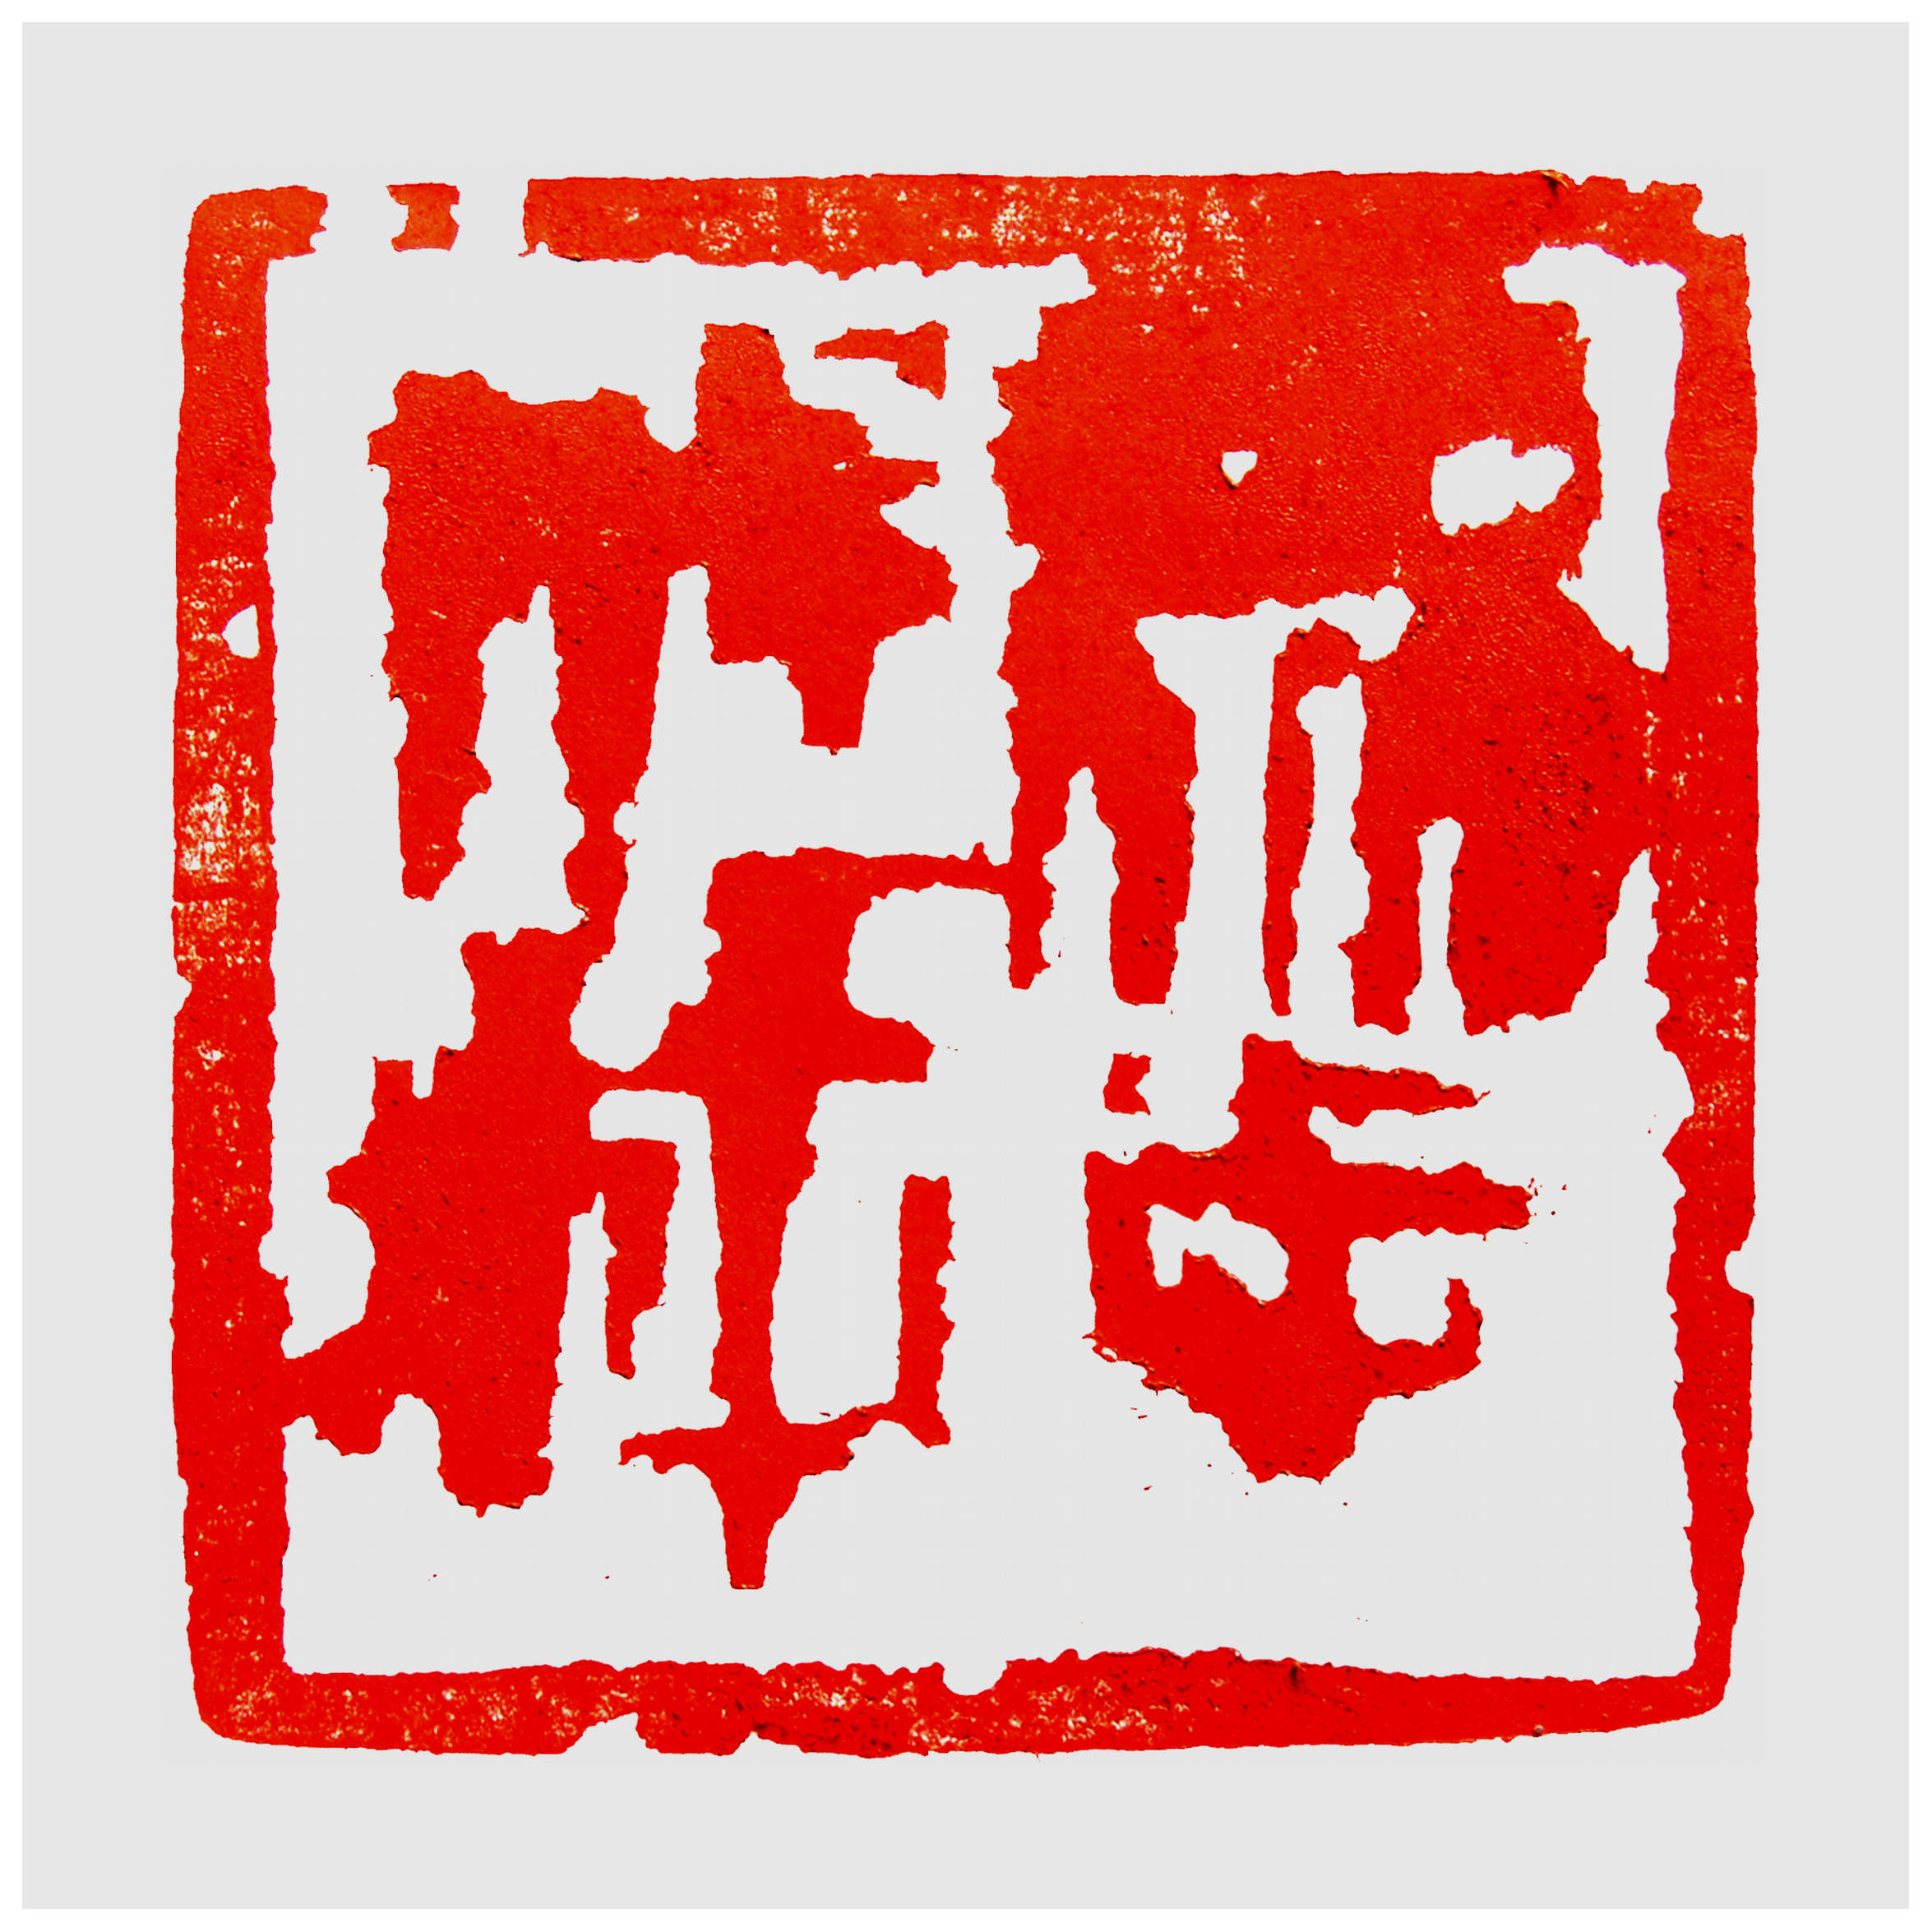 Qi Hong (Sai Koh) 's freehand brushwork style semi-seal script seal carving (aka Chinese seal engraving, seal cutting) imprint: Unity of Will, 90×90mm, stone